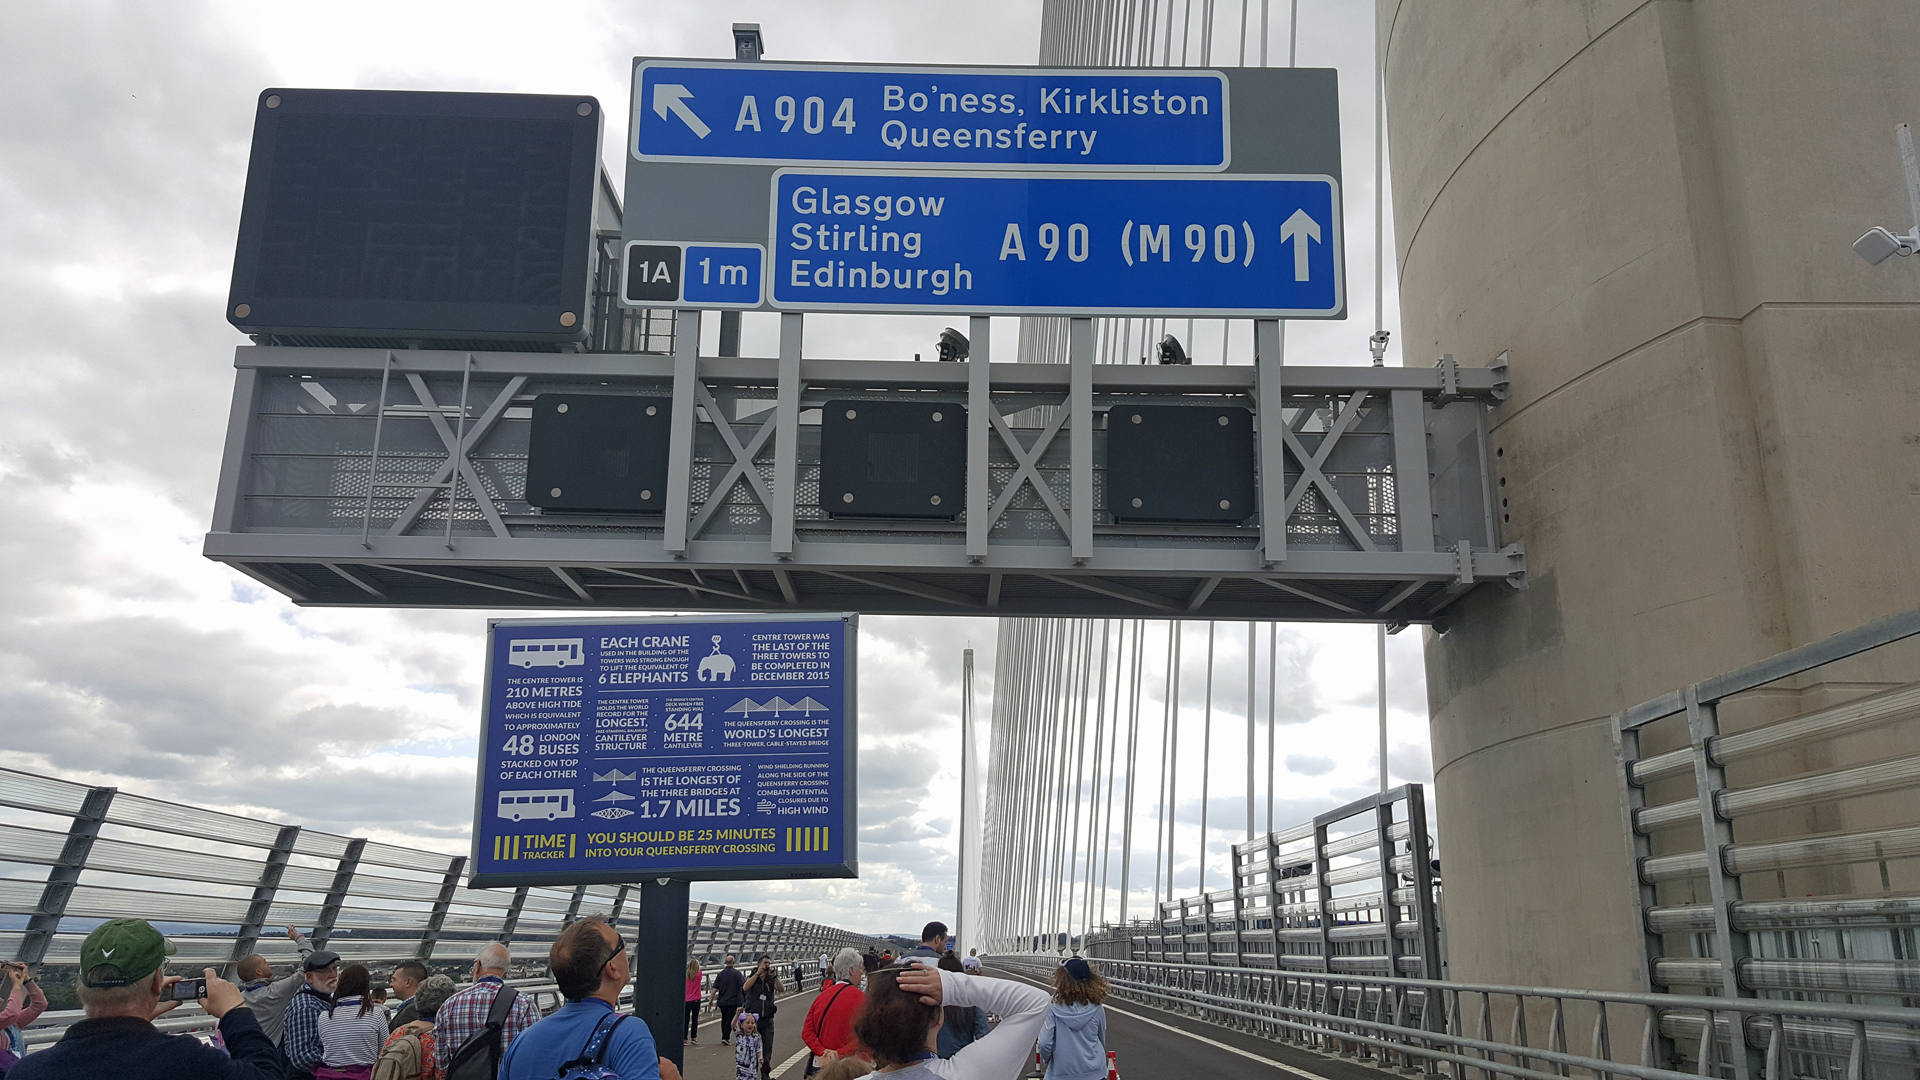 The Queensferry Crossing experience checkpoint facts